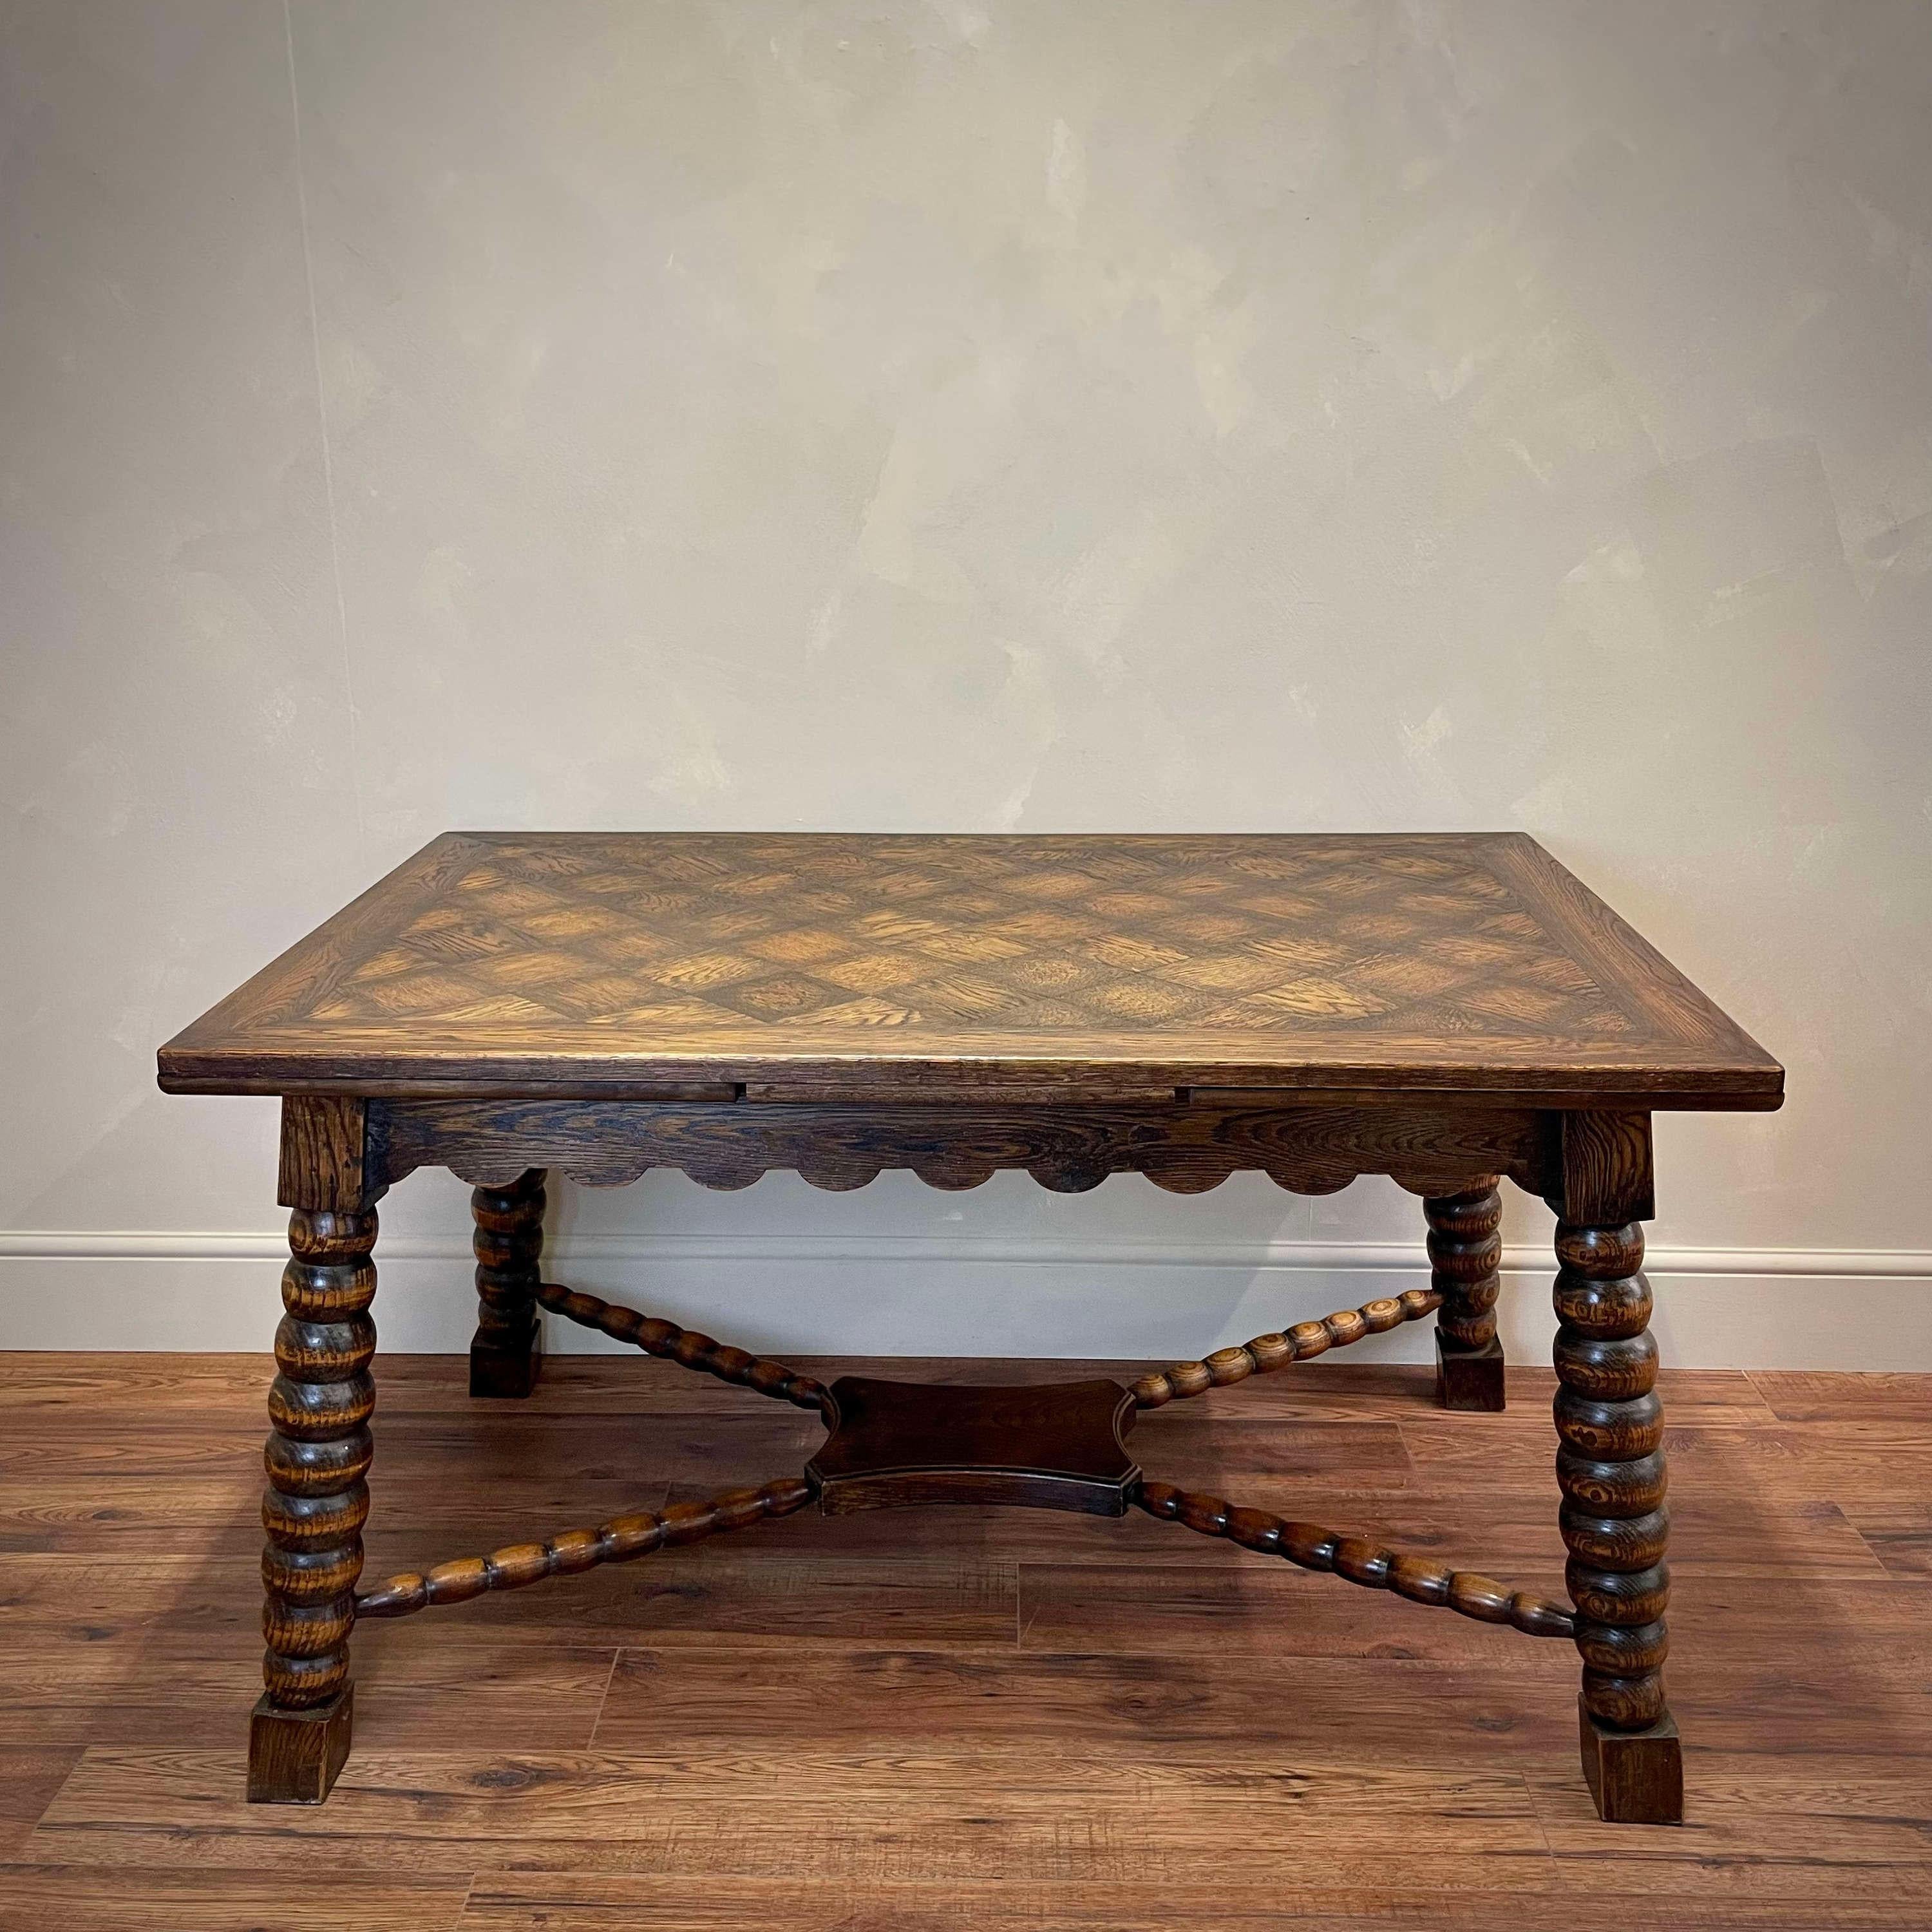 Beautiful carved wood table by Charles Dudouyt, made in France, 1940's. Rectangular top with beautiful oak wood veneer parquet design. Decoratively turned x-stretcher, scalloped apron and strong, oversized bobbin turned legs. Original dark wood